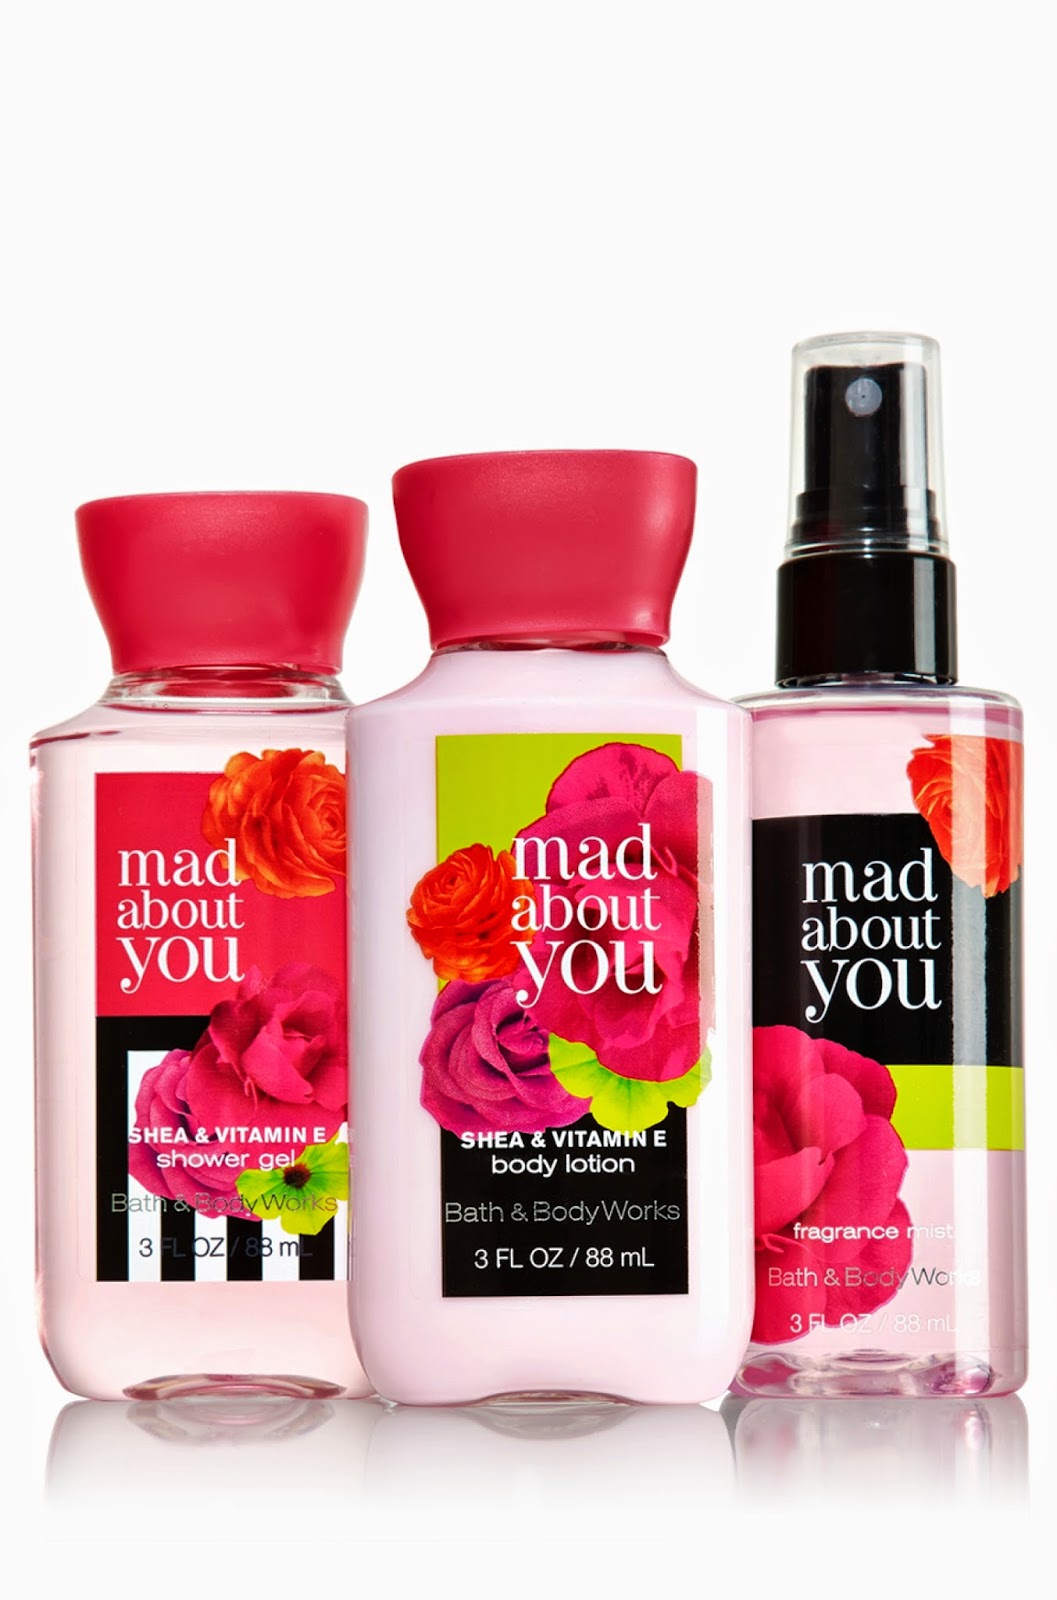 Mad works. Bath and body works Mad about you. Bath body works Sweet Pea. Lotion body & body works. Mad about you Bath body works body Lotion.